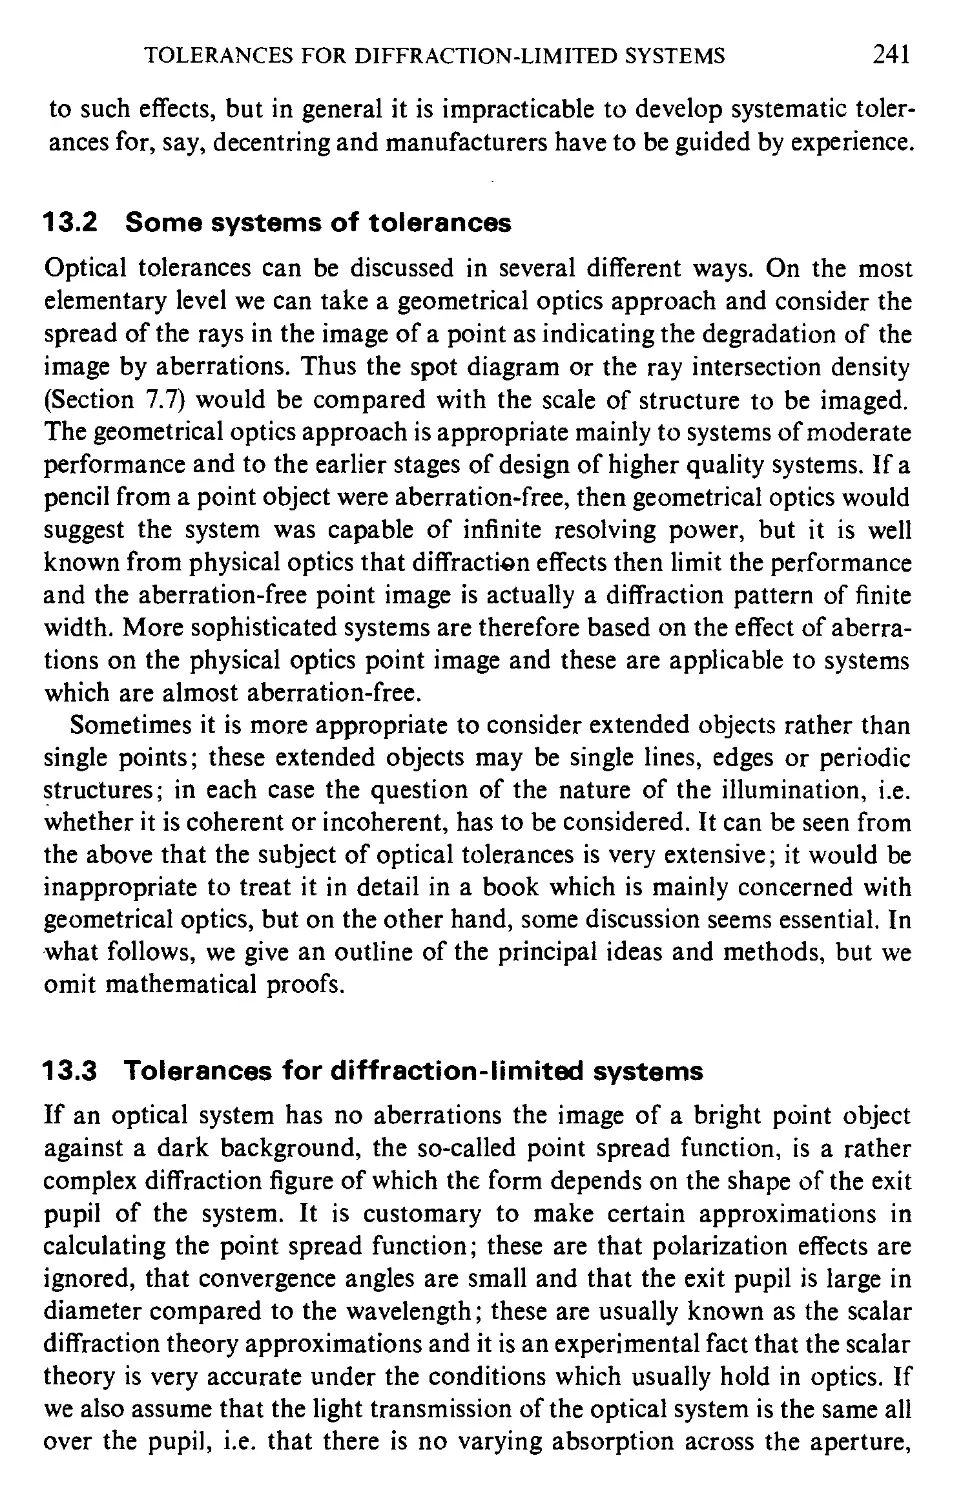 13.2 Some systems of tolerances
13.3 Tolerances for diffraction-limited systems